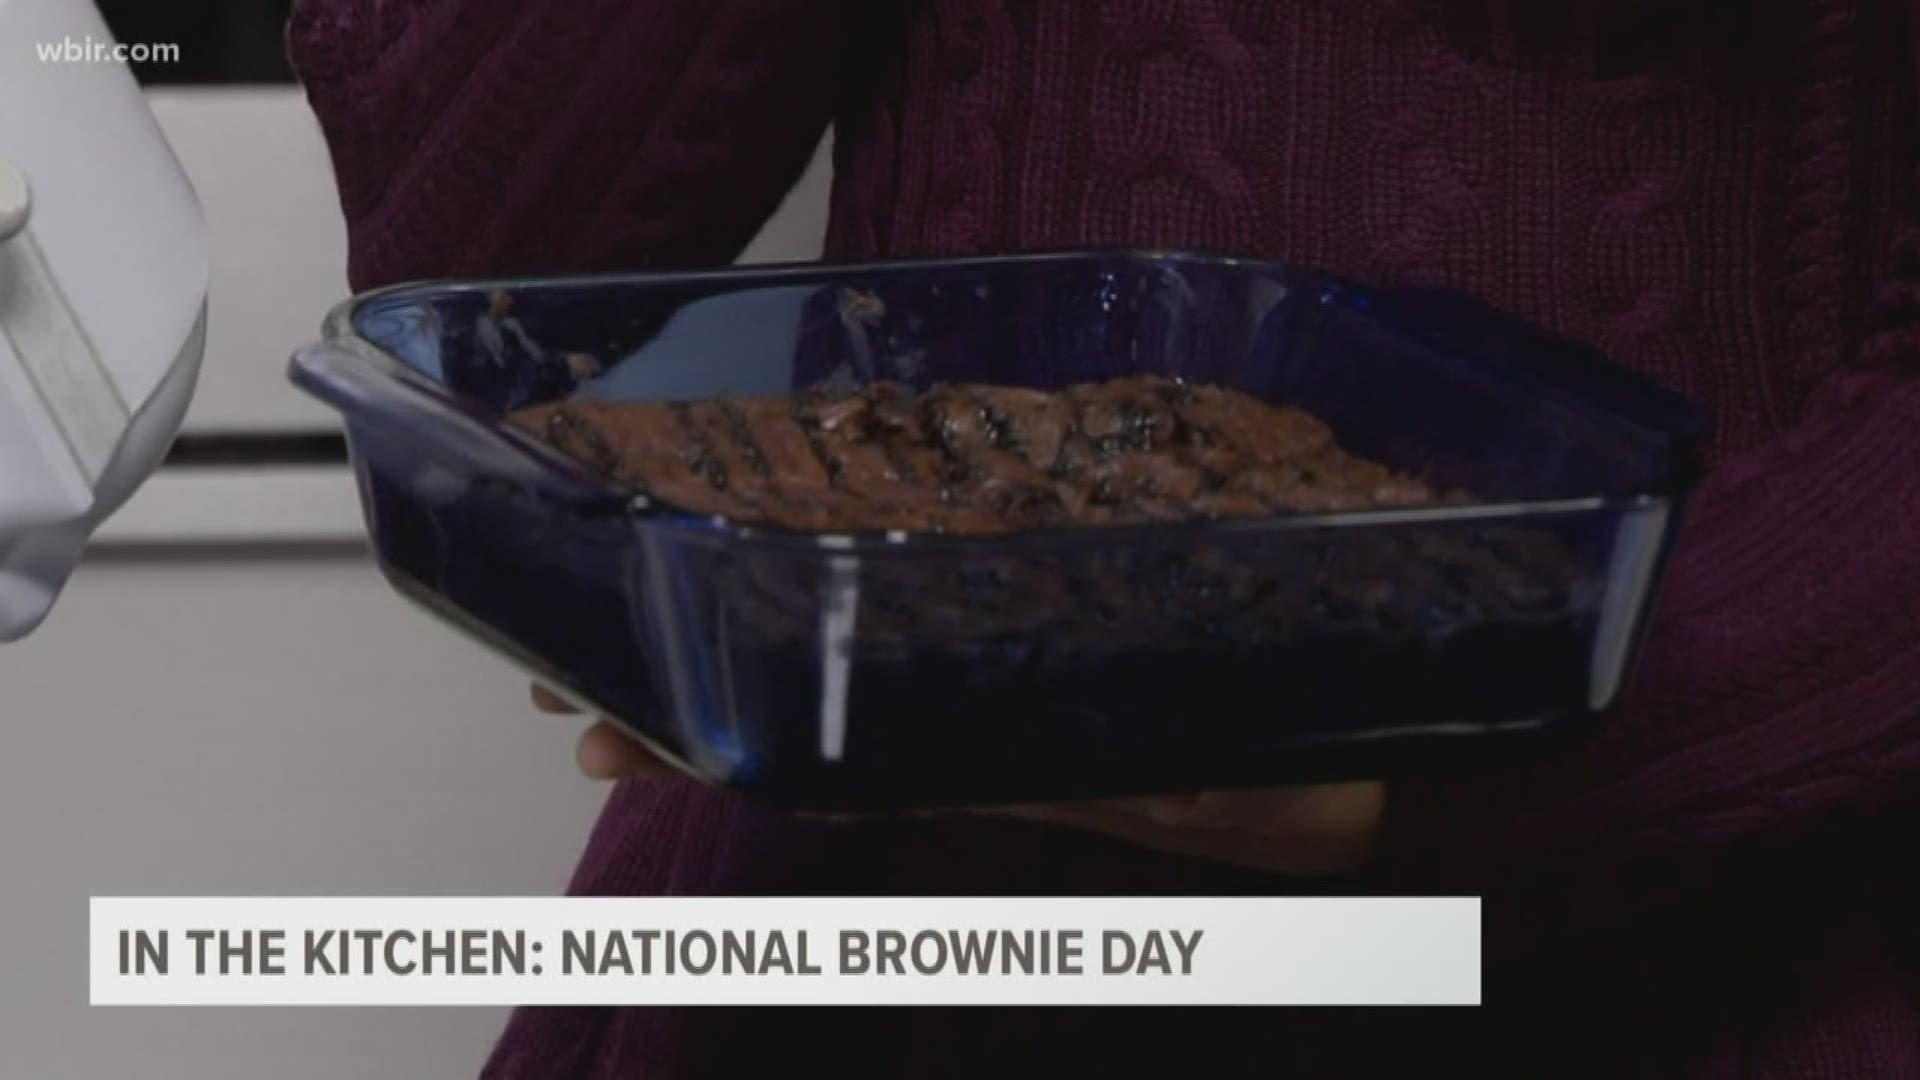 We're in the kitchen making brownies for National Brownie Day!